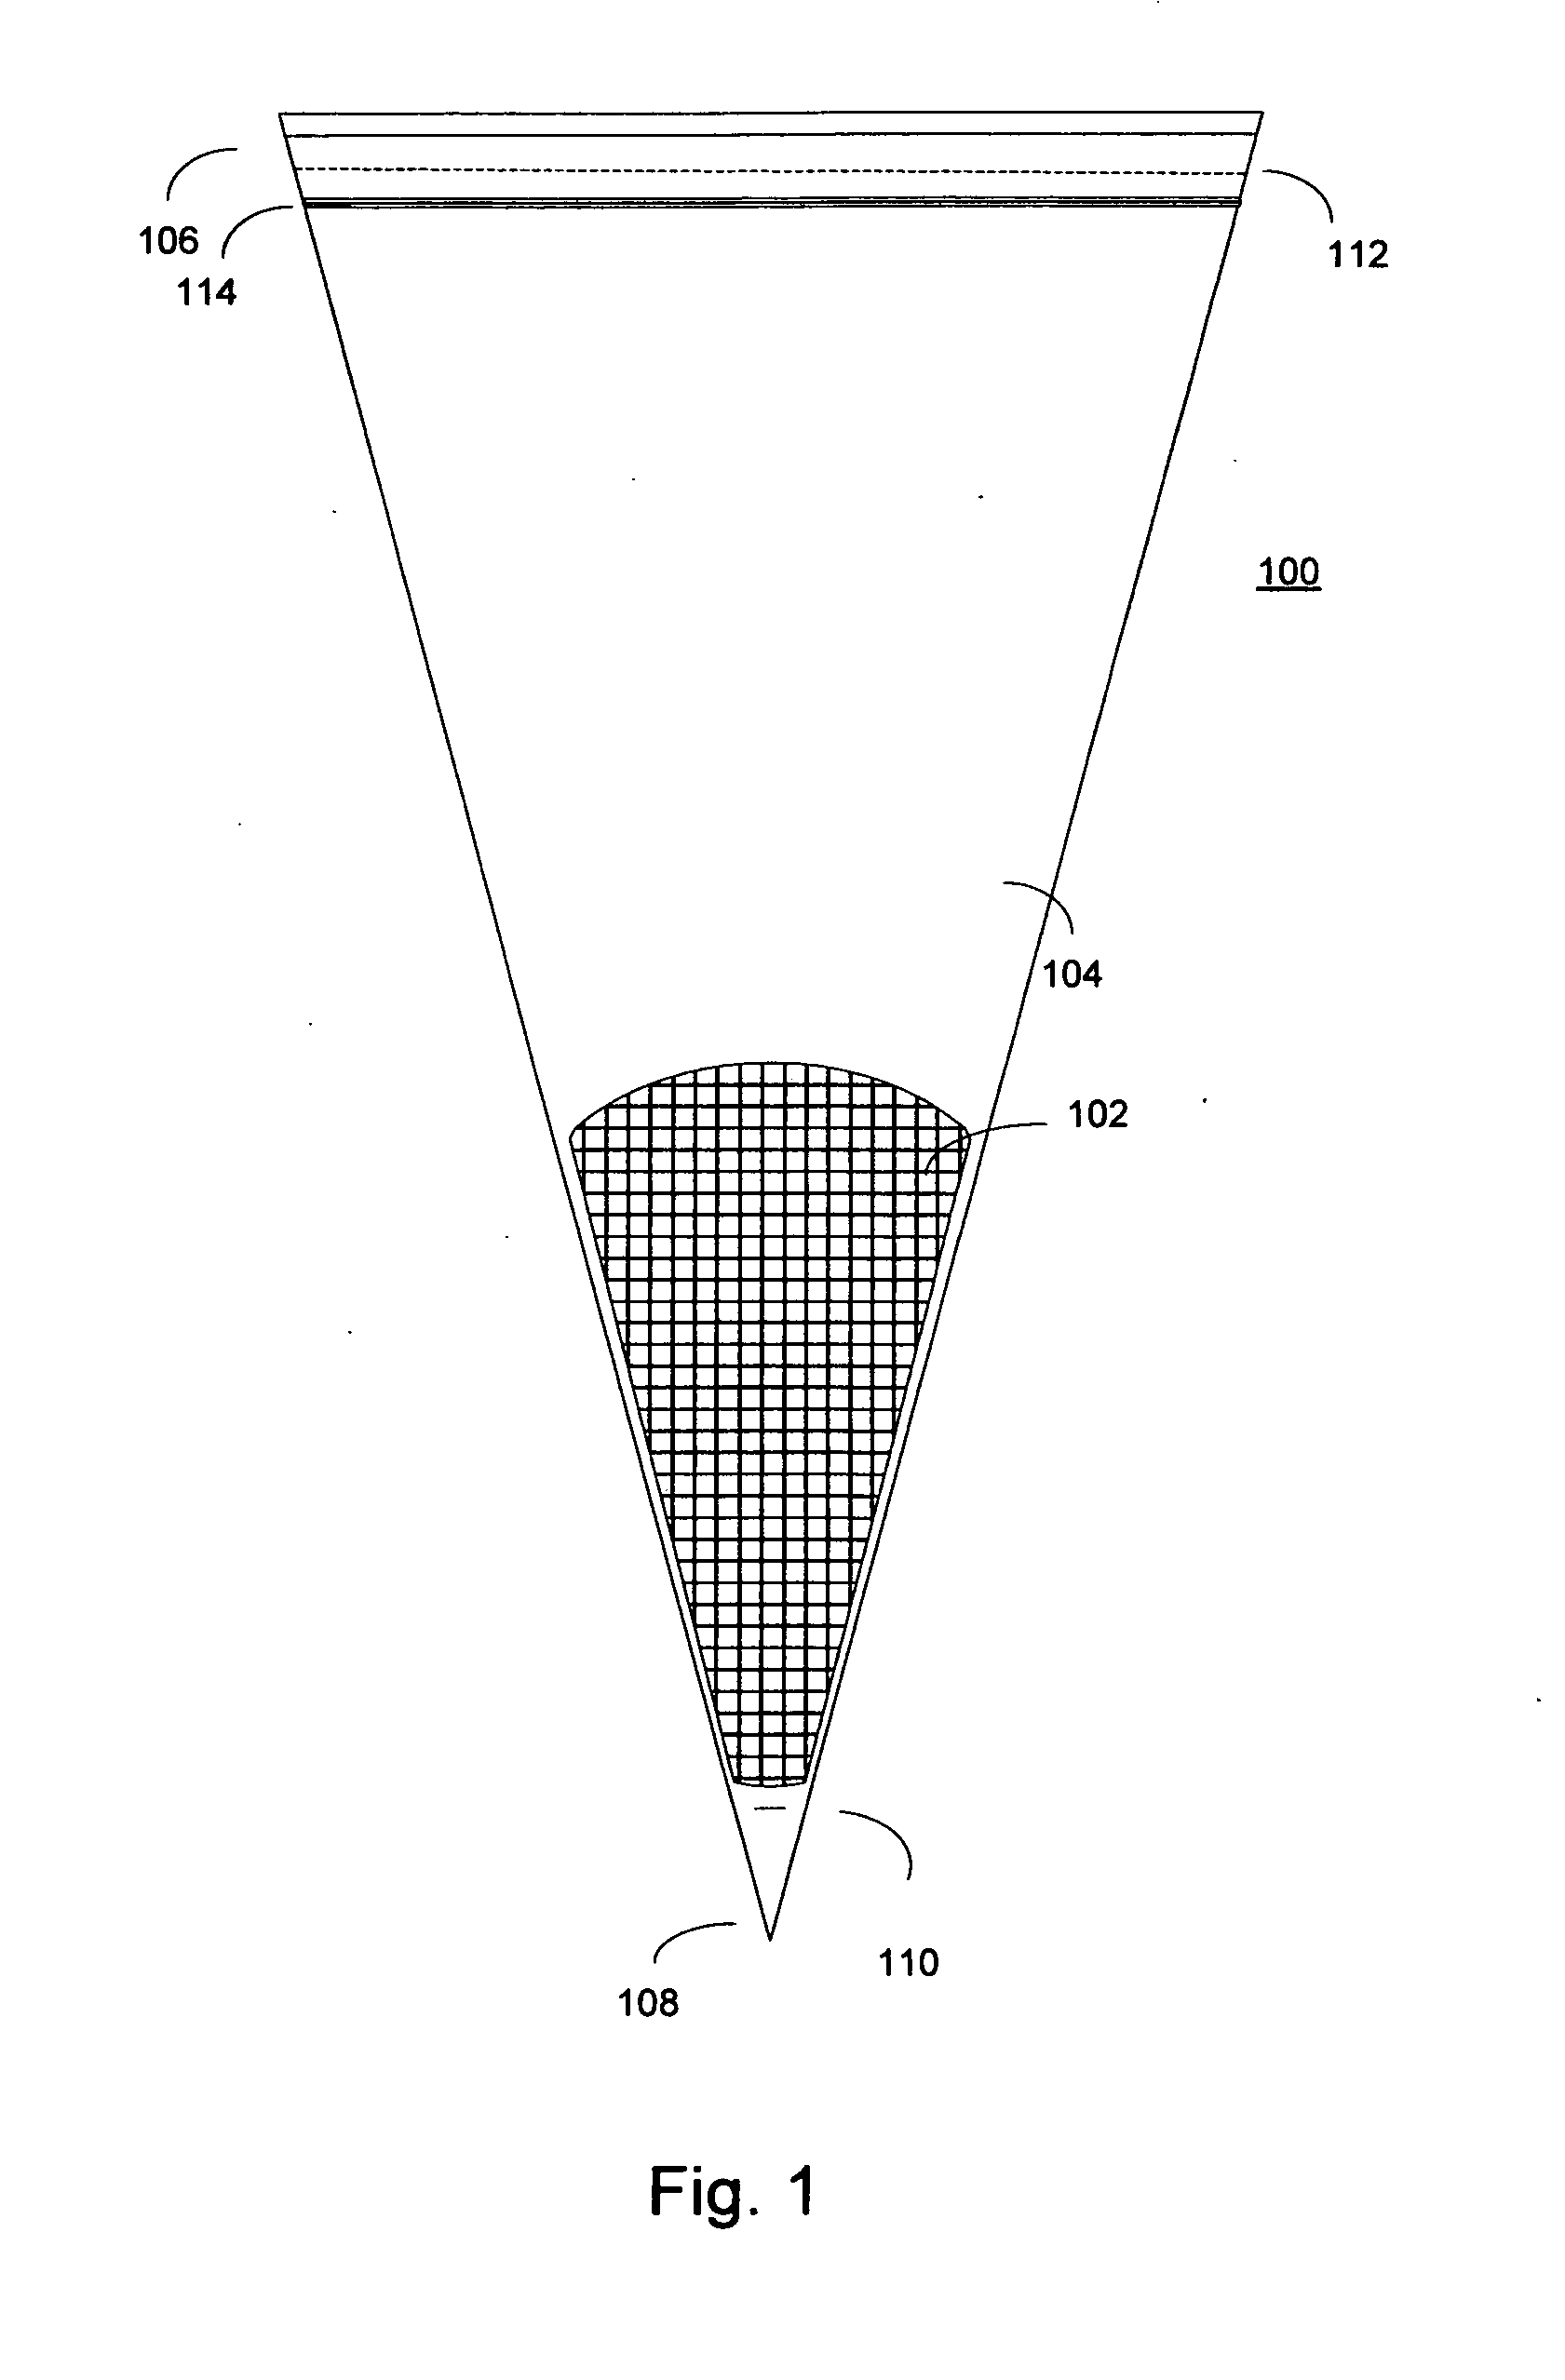 System and method of preparing frozen baking items